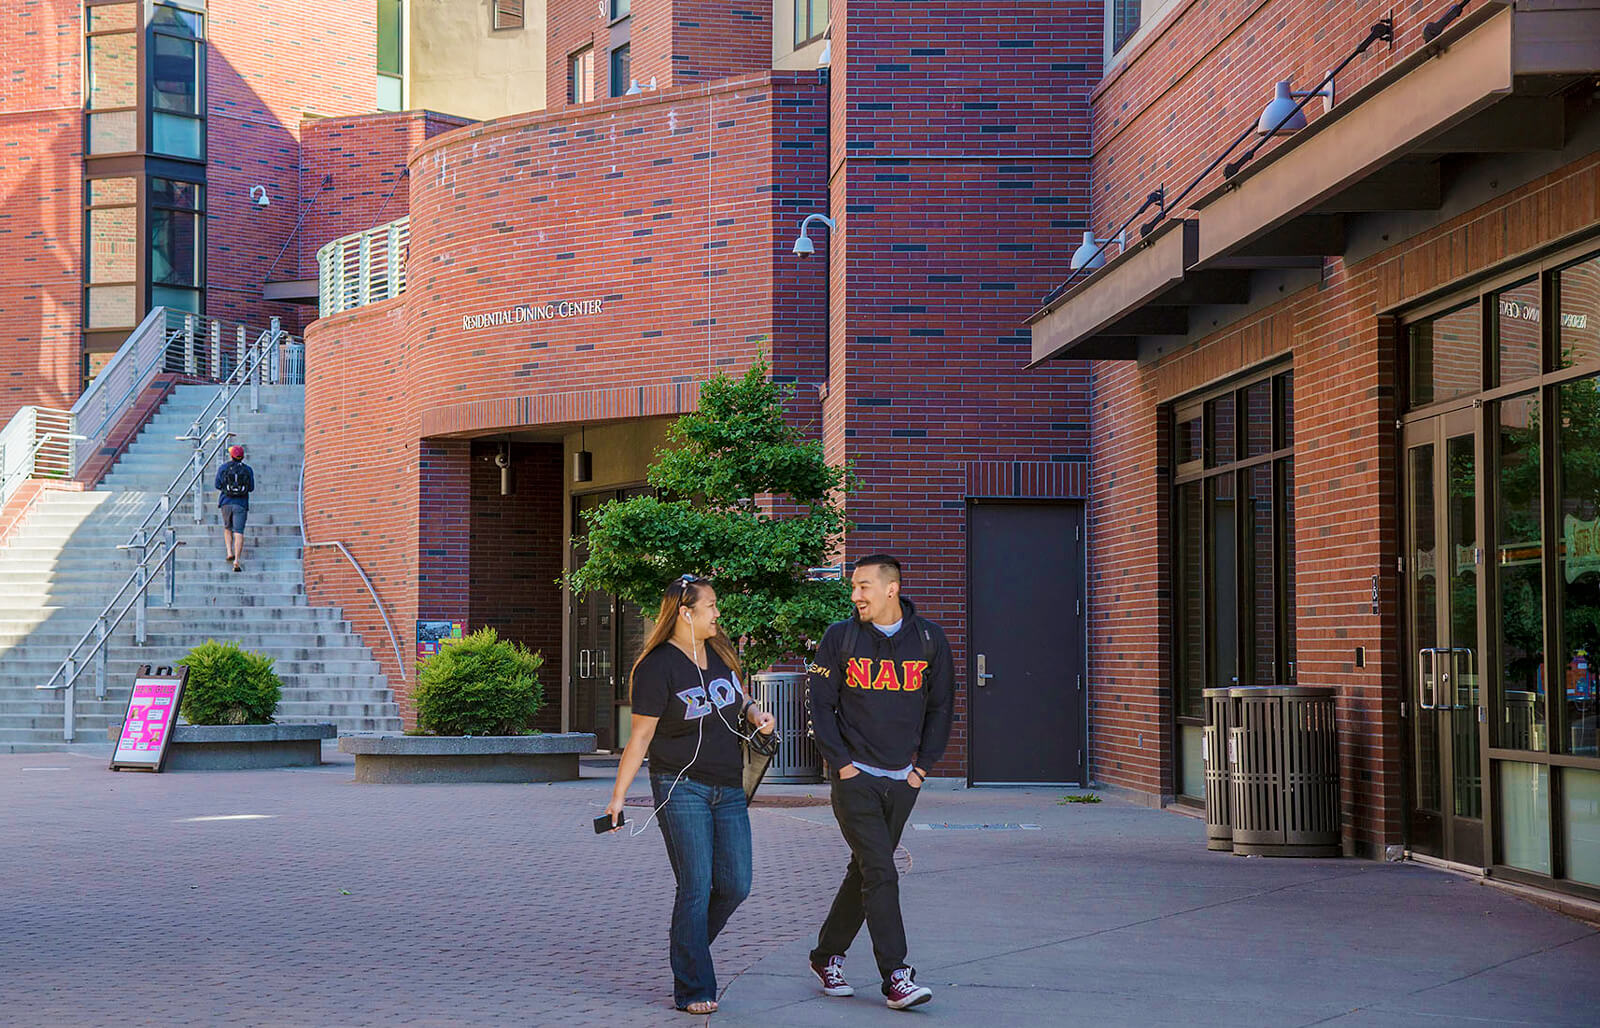 Students walking in front of campus building.